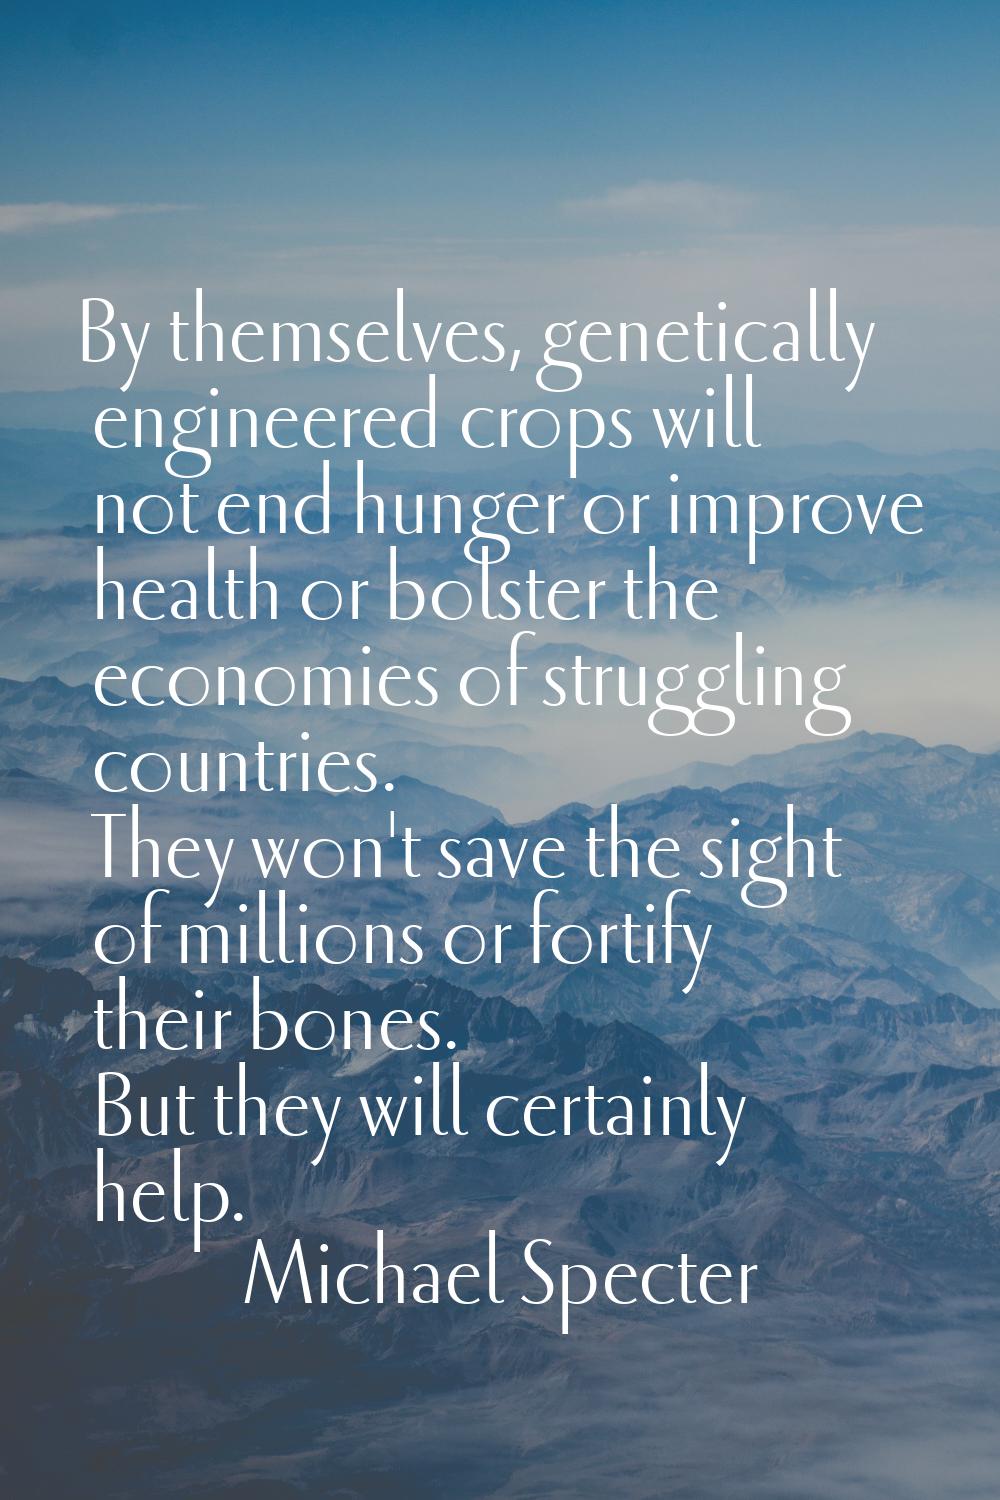 By themselves, genetically engineered crops will not end hunger or improve health or bolster the ec